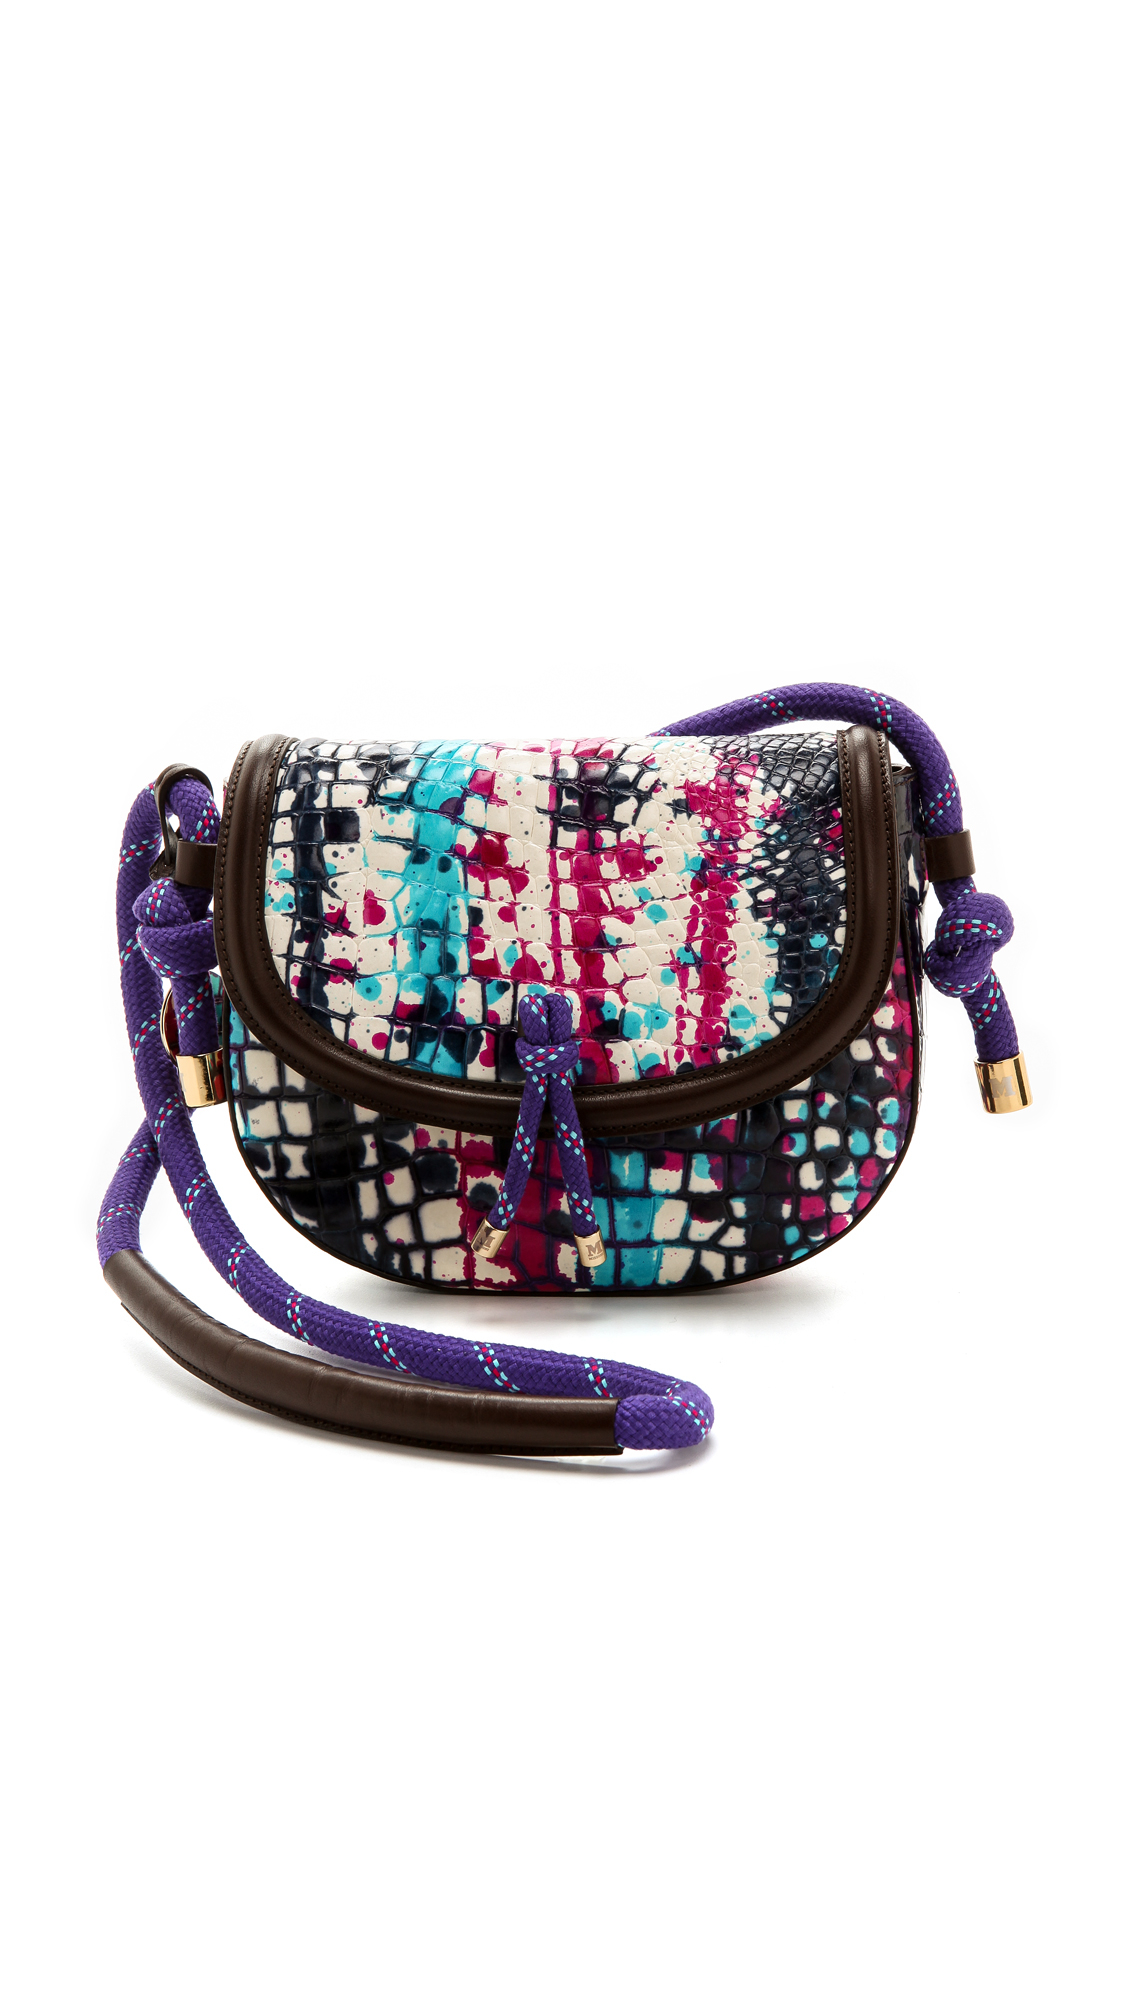 Lyst - M Missoni Painted Leather Cross Body Bag in Blue